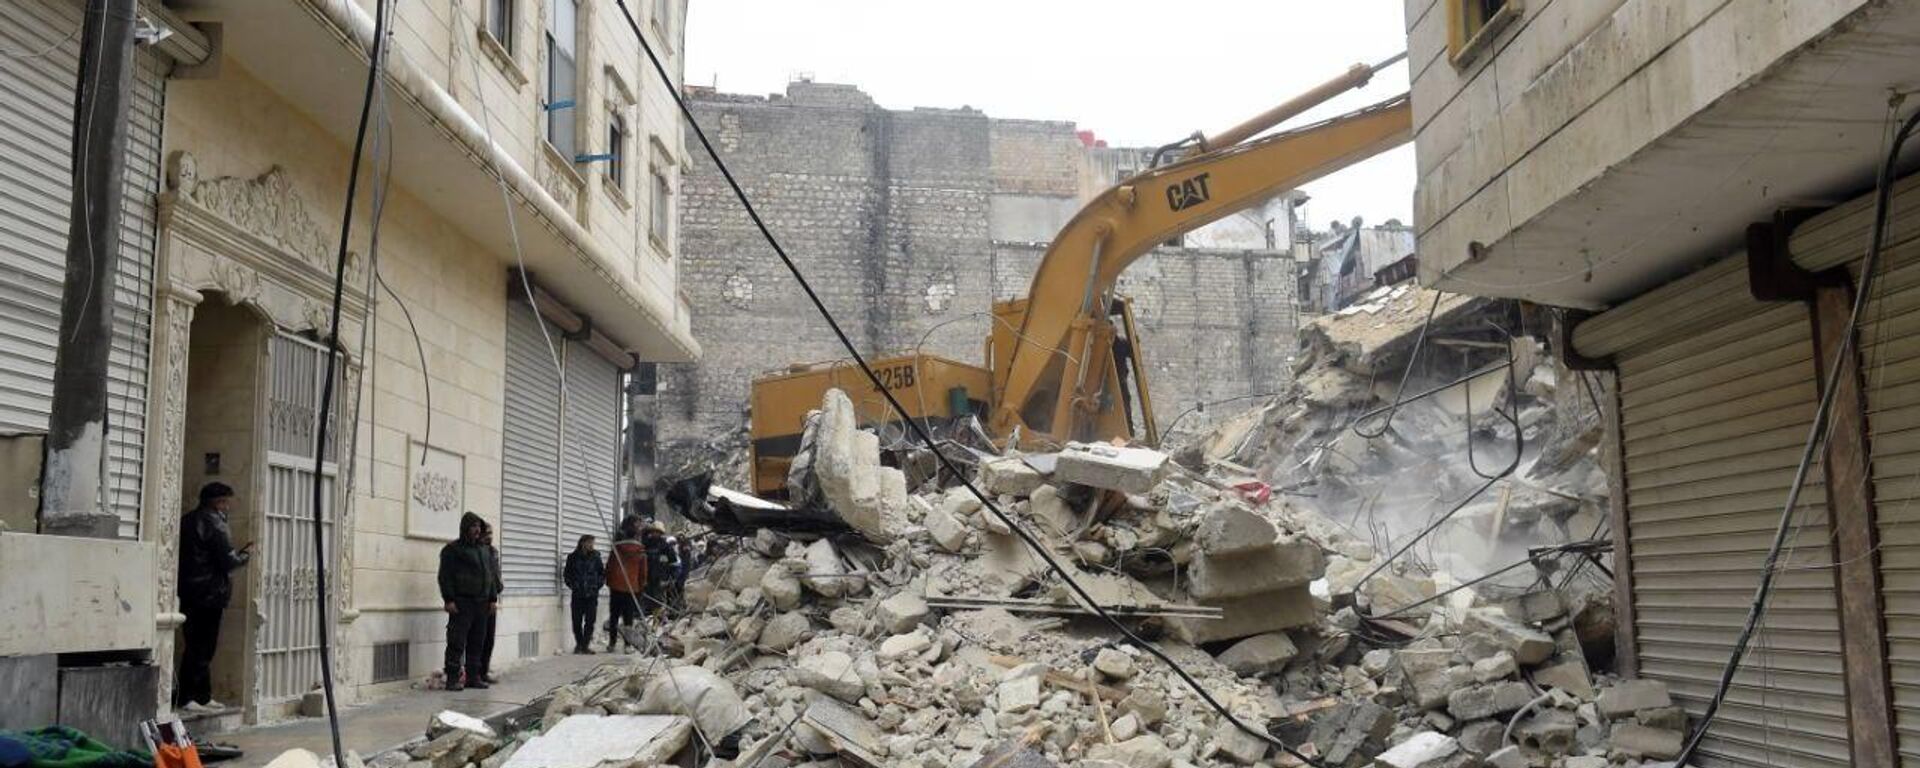 Construction equipment is used to clear debris as the search for survivors continues, in the aftermath of the earthquake, in Aleppo, Syria. - Sputnik International, 1920, 10.02.2023